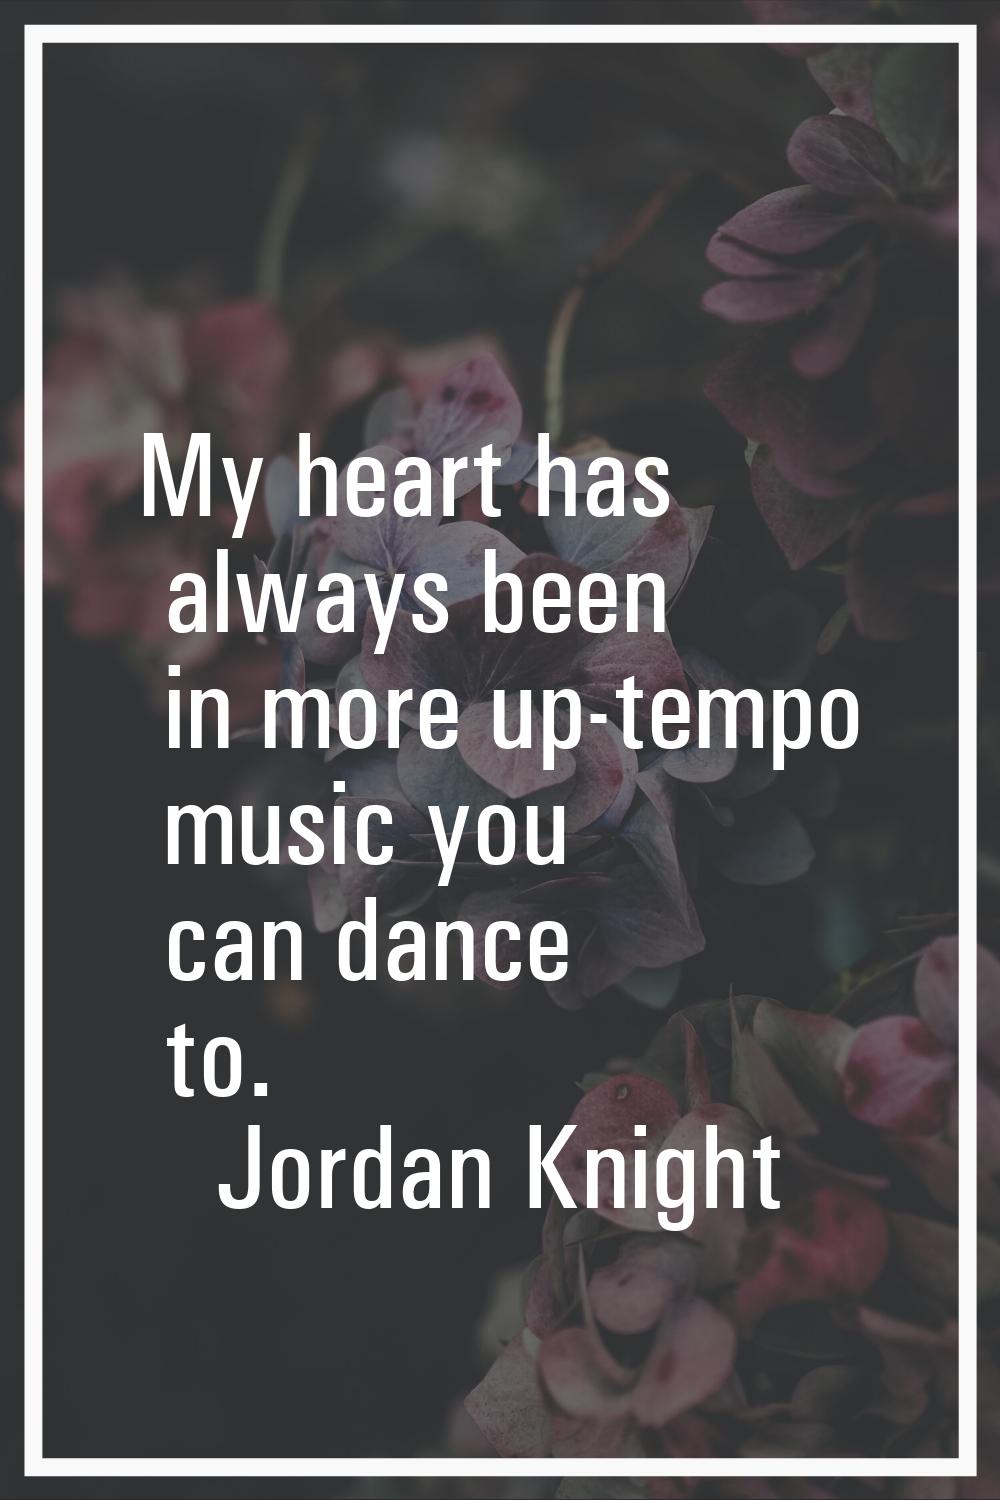 My heart has always been in more up-tempo music you can dance to.